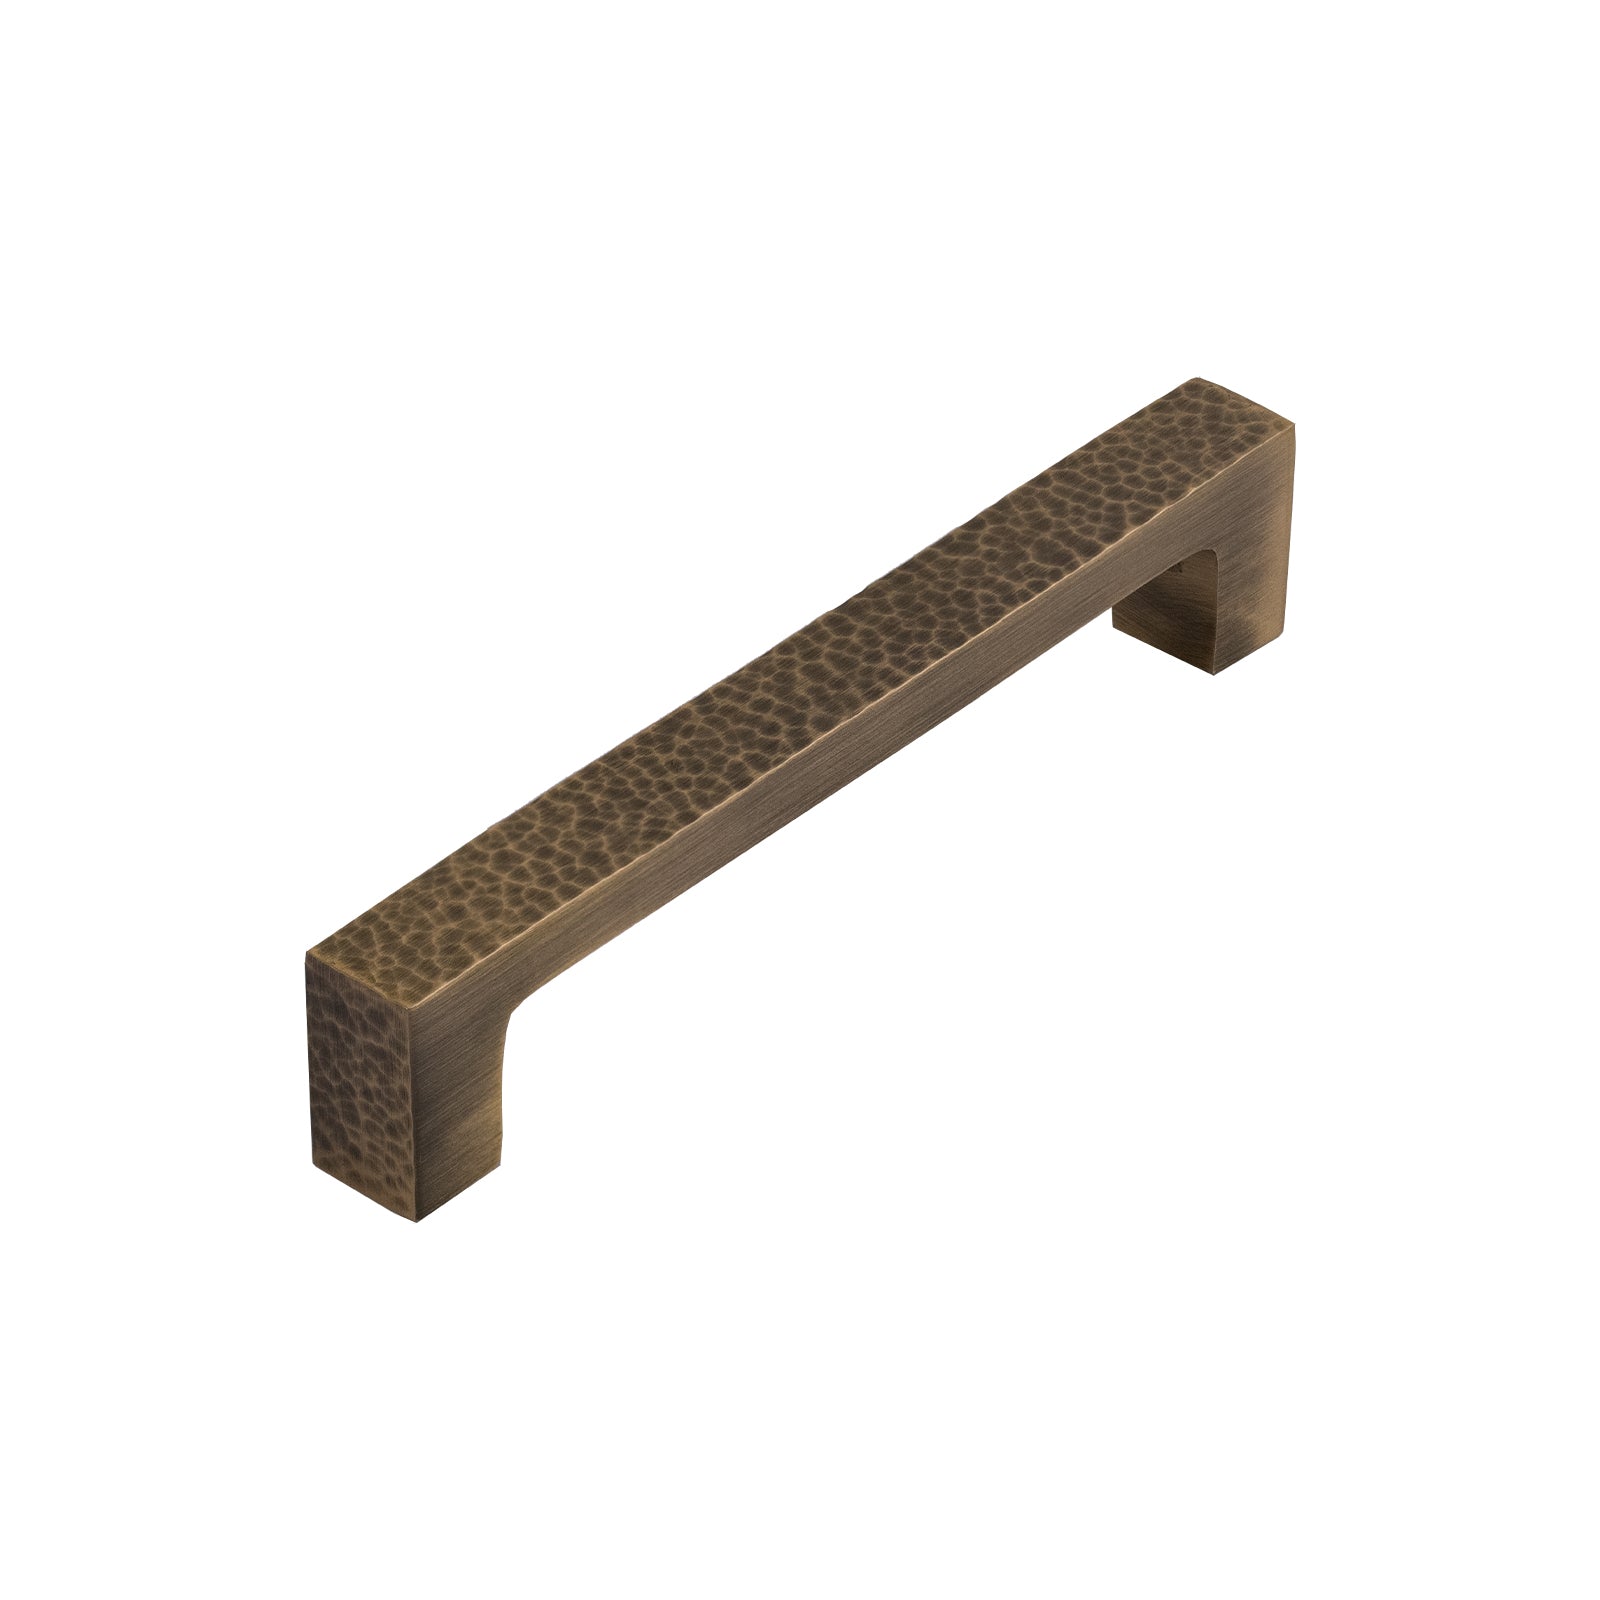 Hammered Square Pull Handles in Antique Brass 142mm SHOW